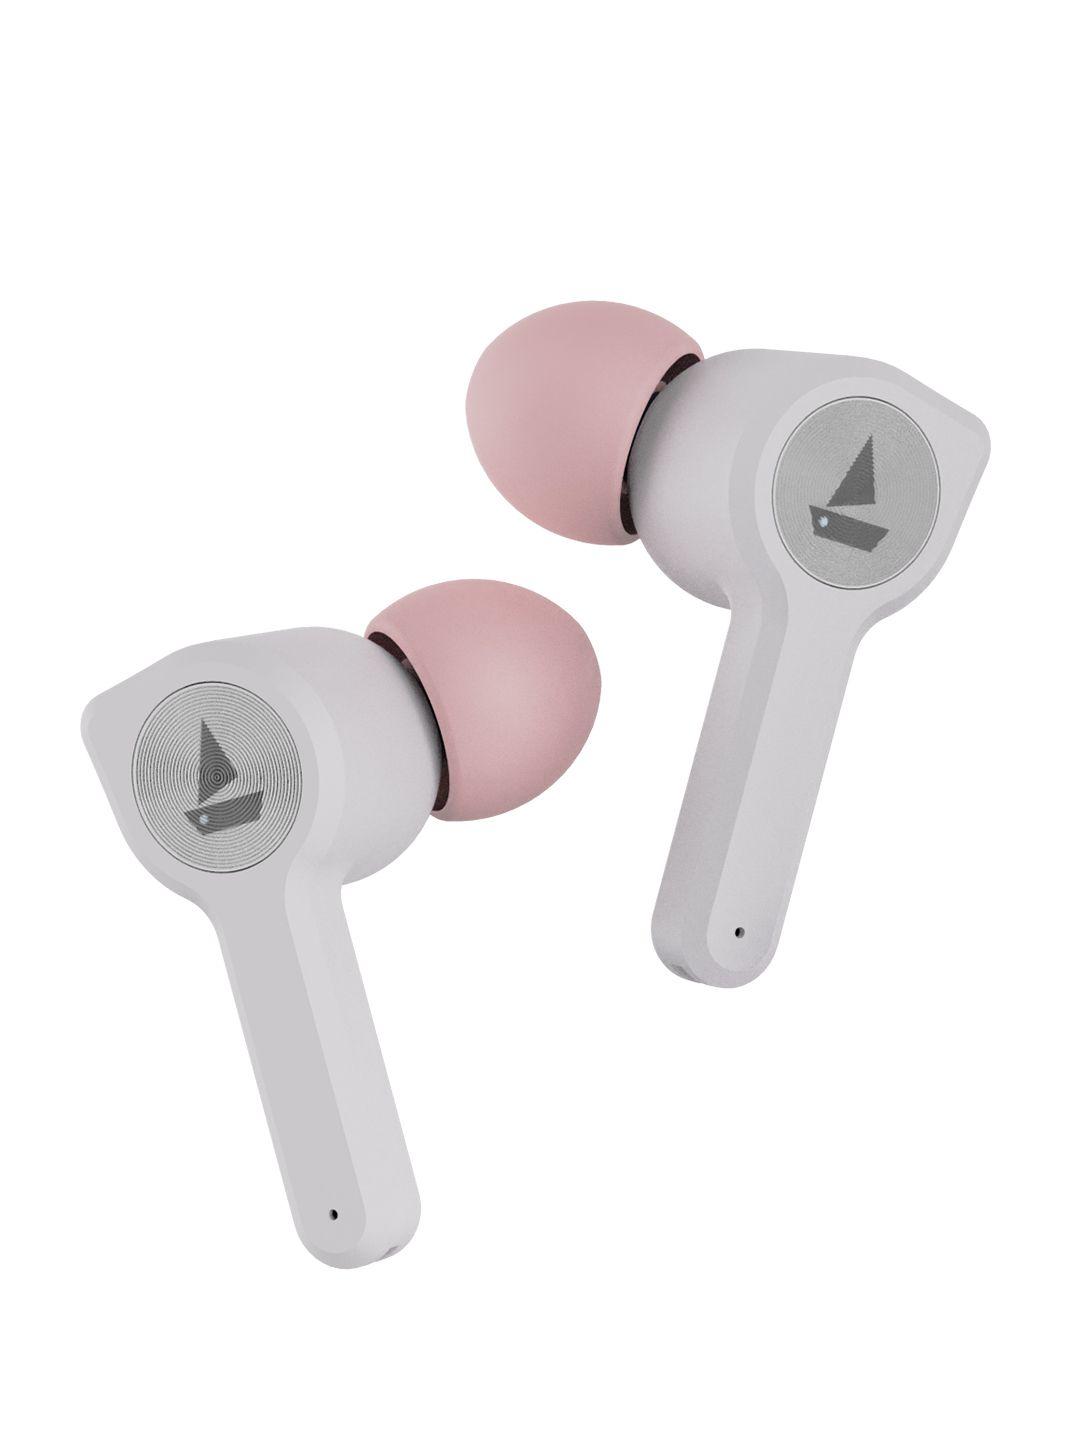 boat airdopes 402 m tws rosegold white earbuds with touch controls immersive audio